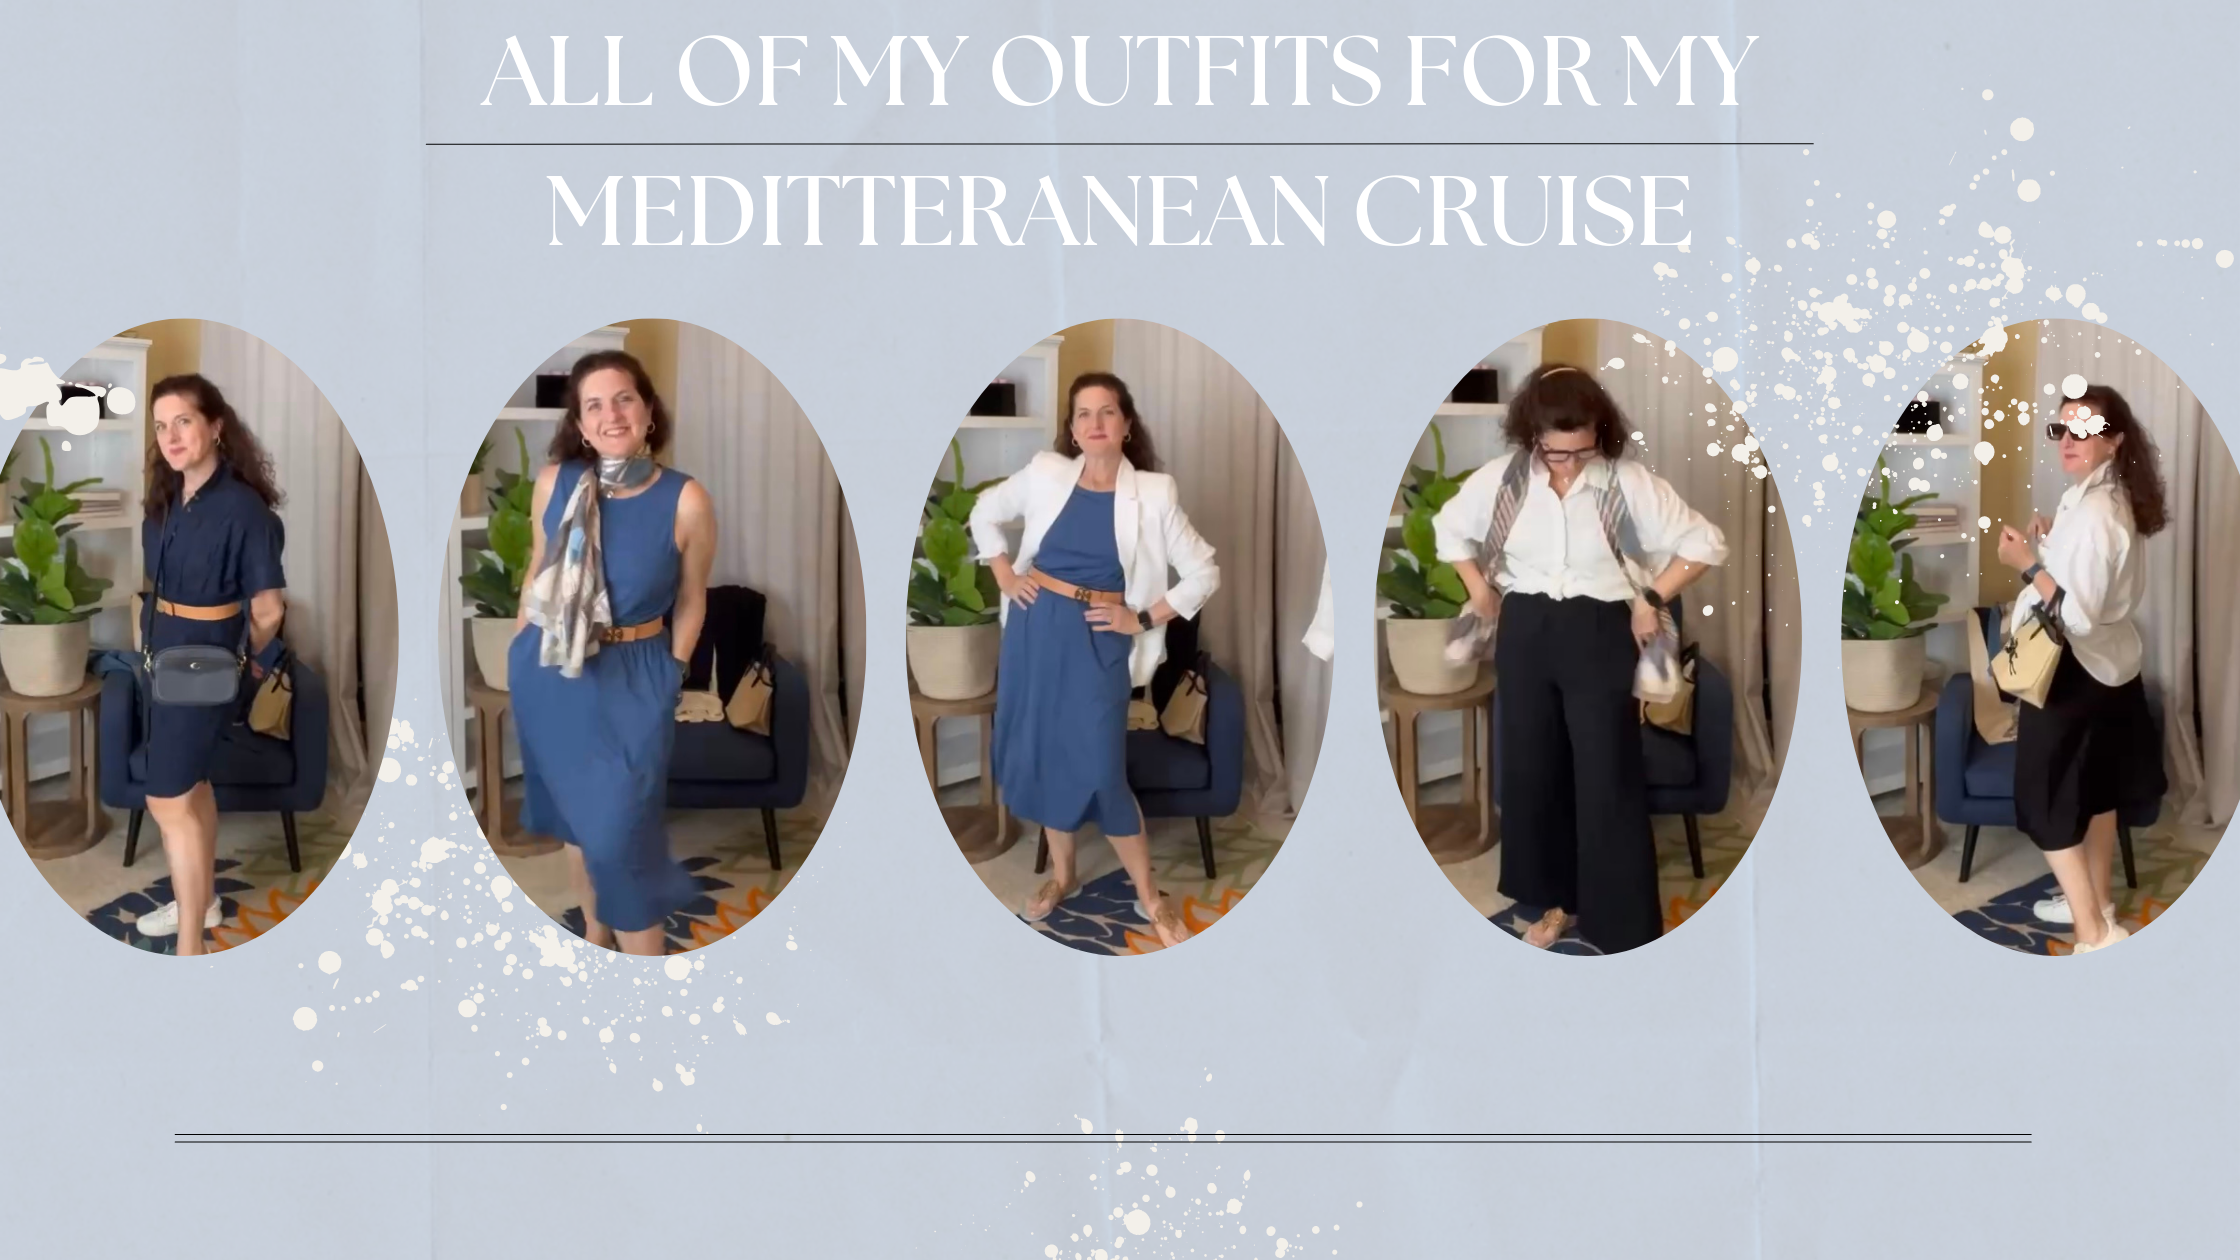 All of the Outfits for My Mediterranean Cruise